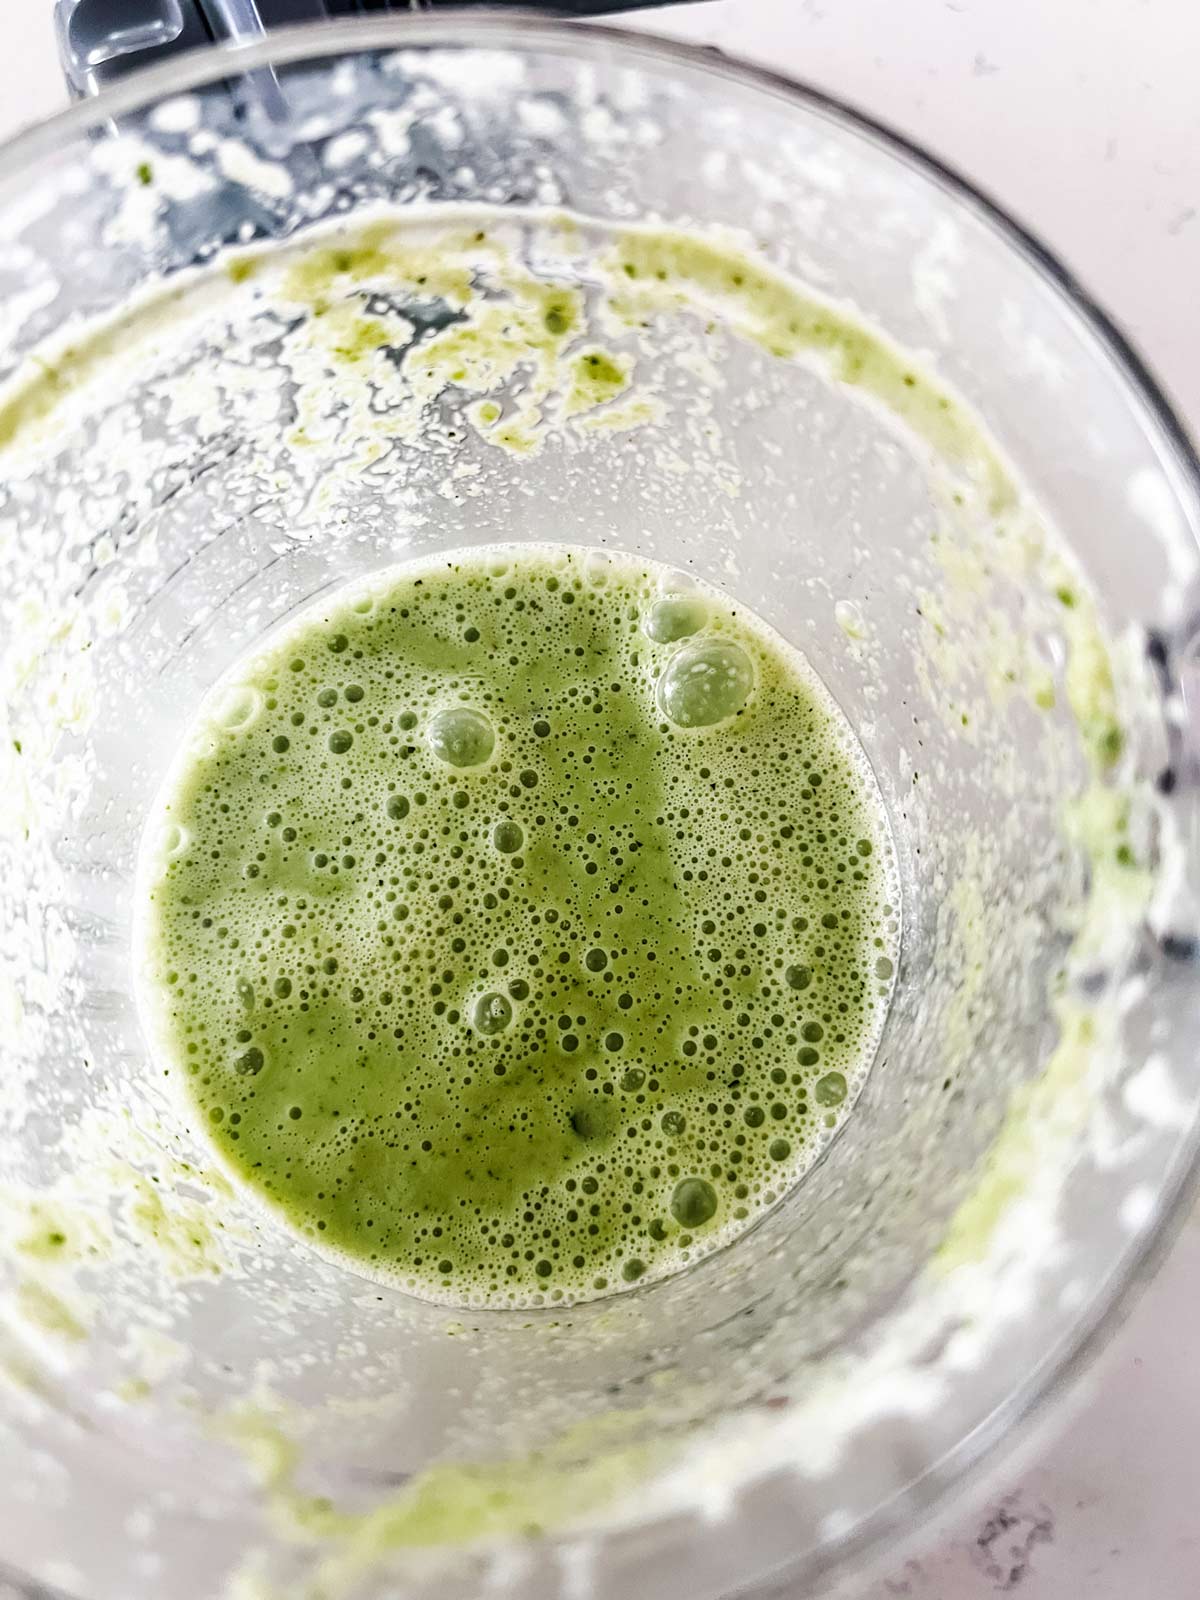 A cucumber apple smoothie in a blender.